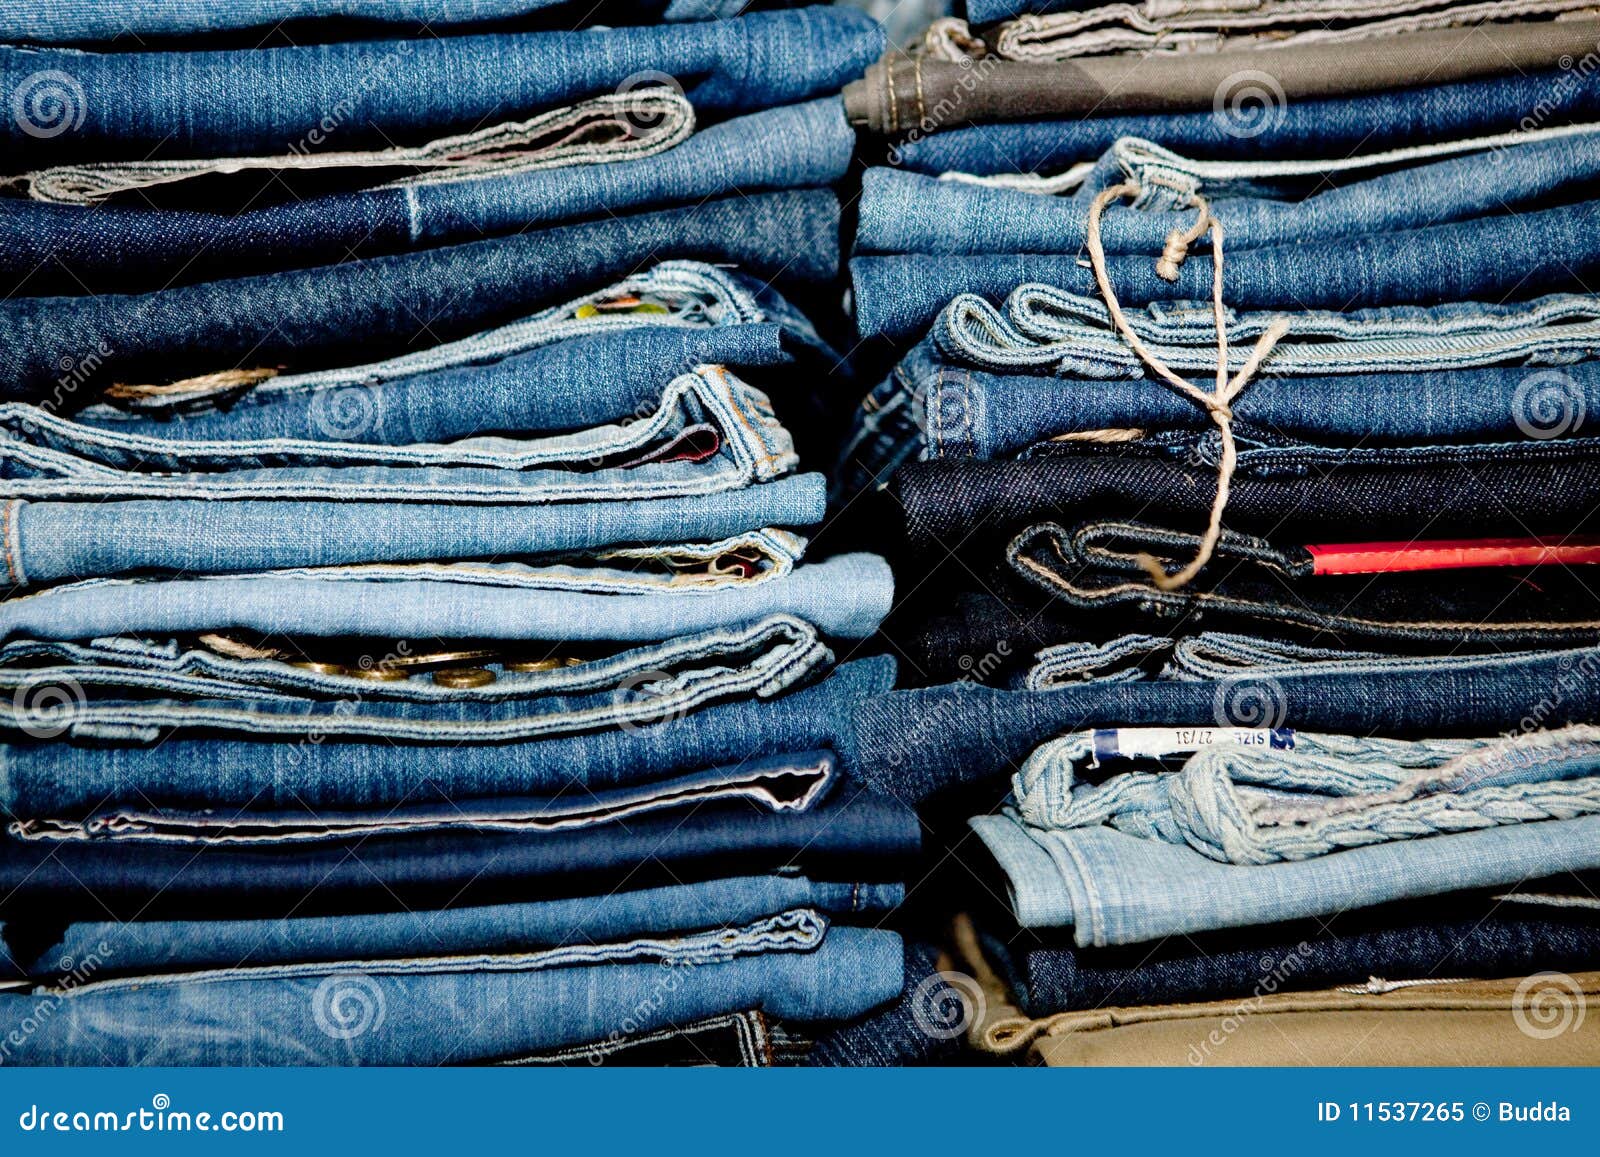 Jeans Stack Royalty Free Stock Photo - Image: 11537265